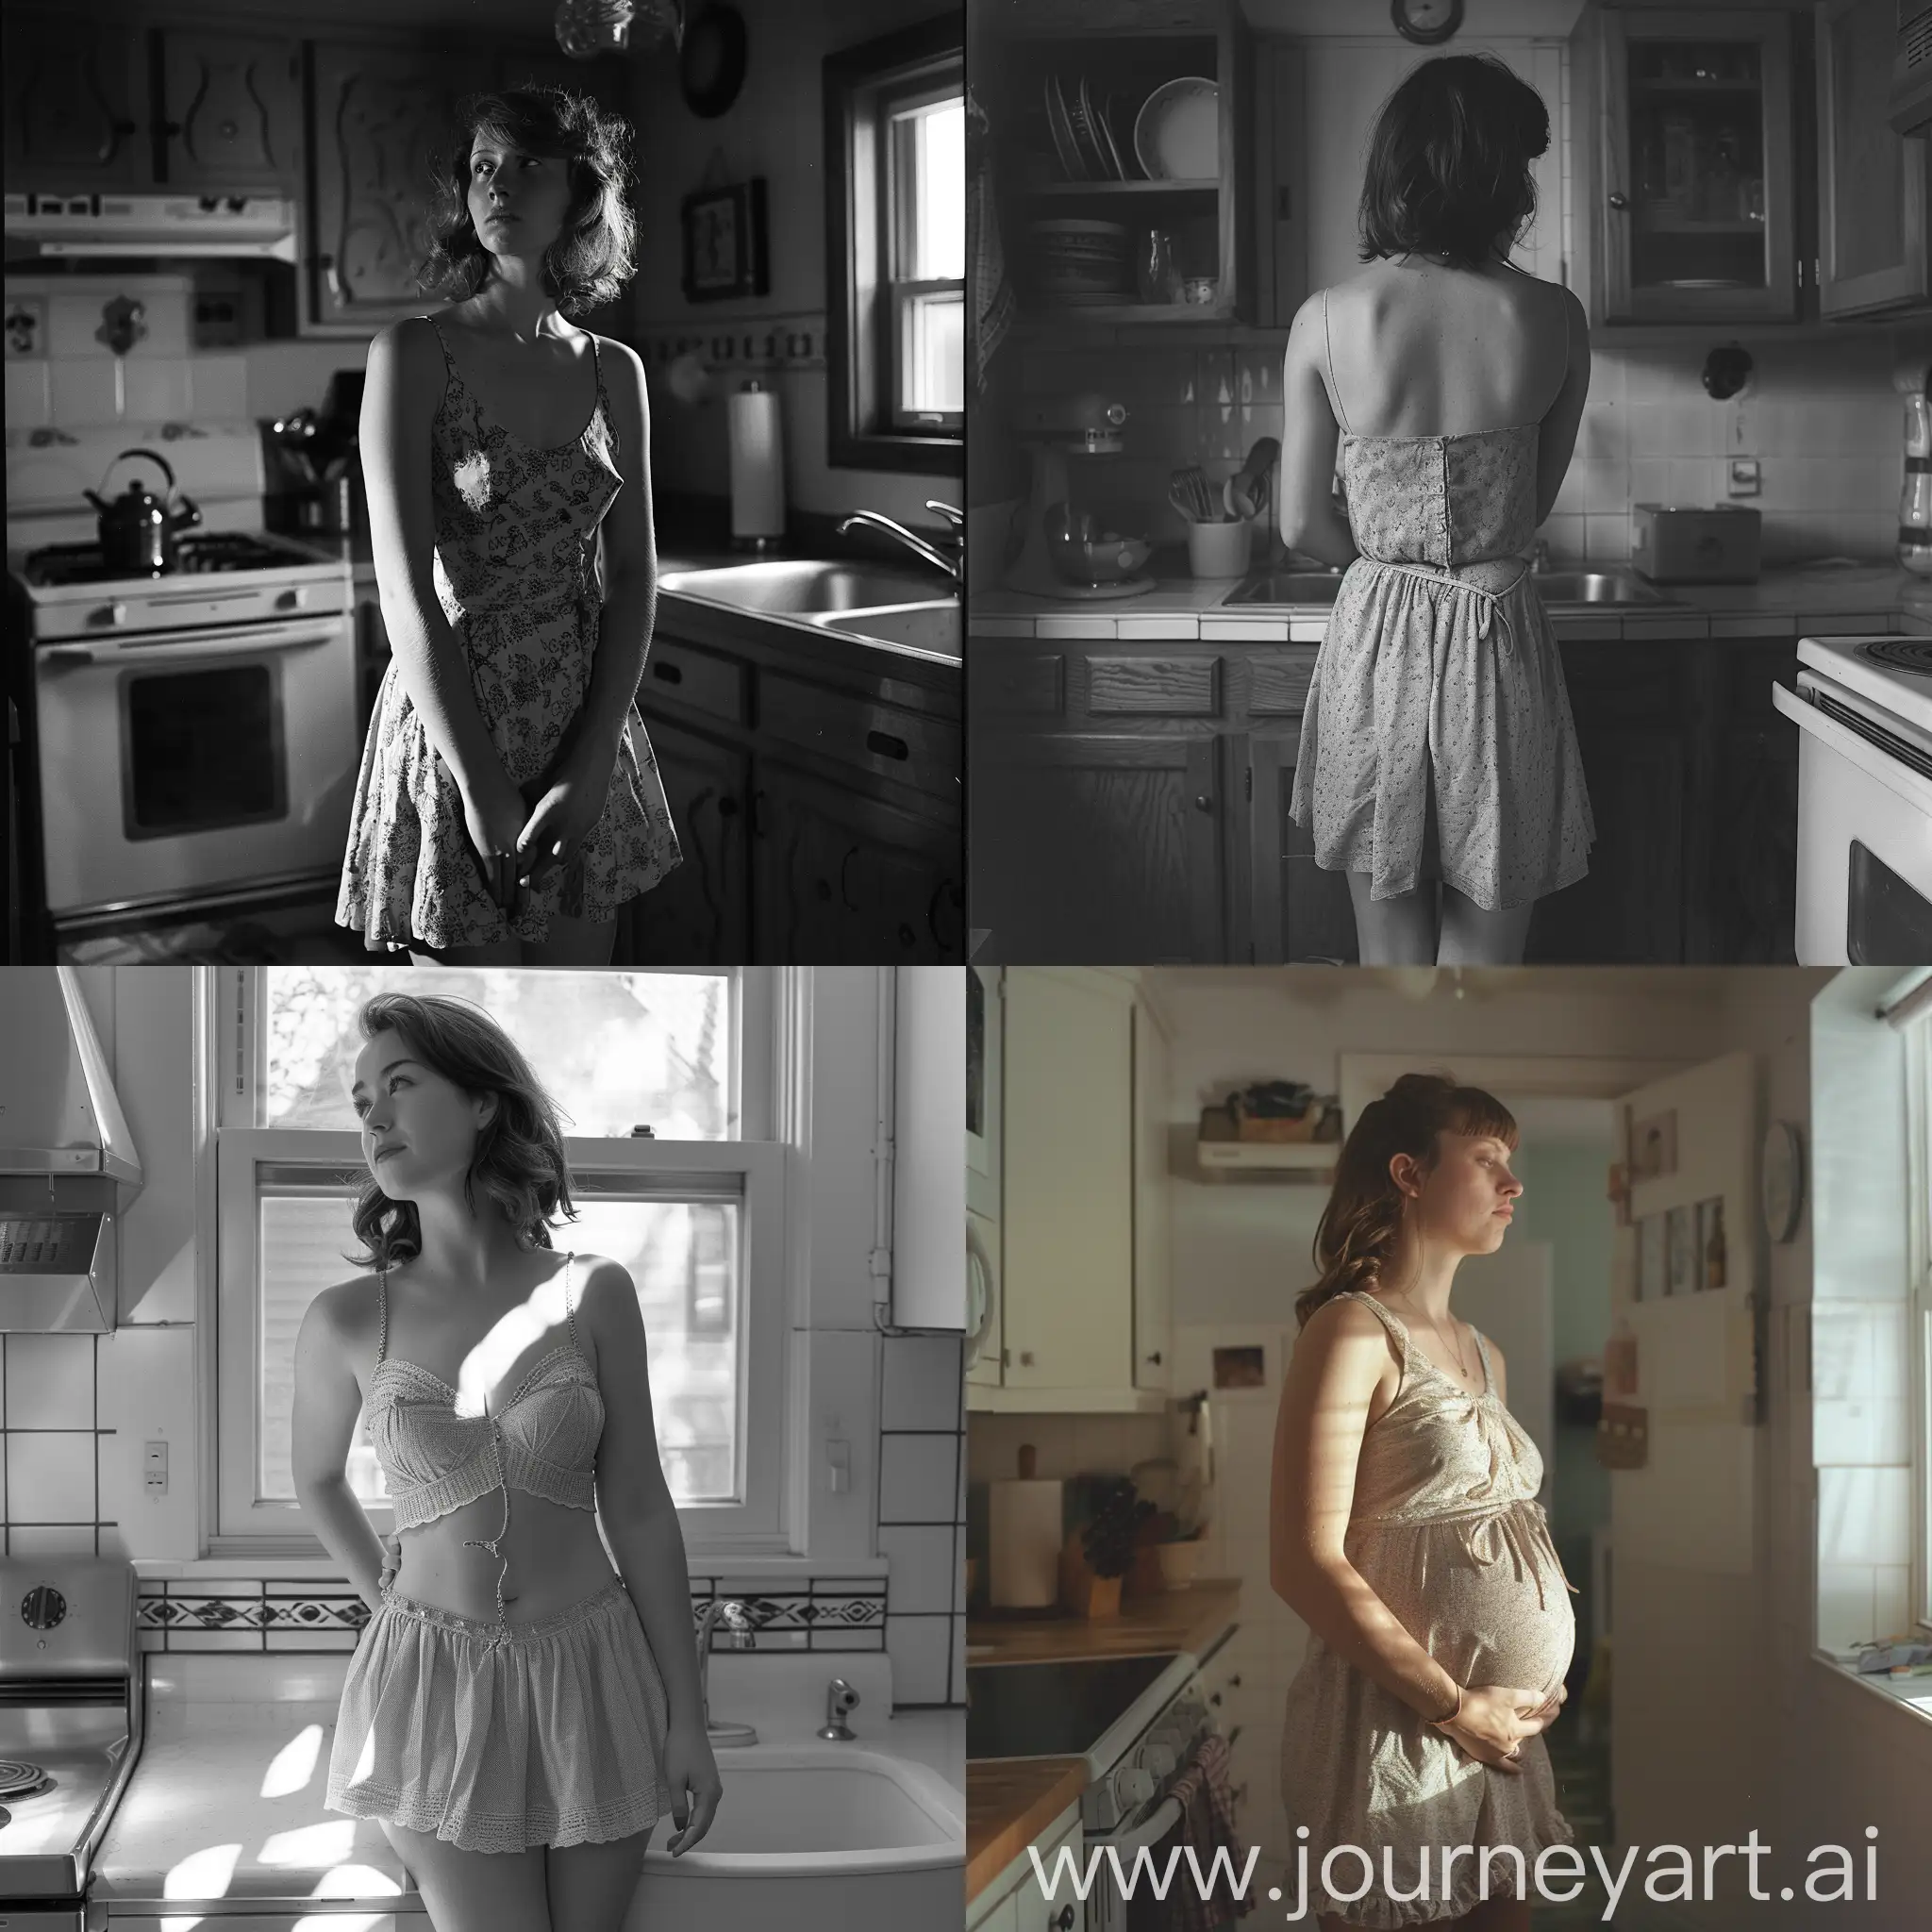 25-year-old woman, in the kitchen, standing, in a dress, full-body shot, full-body capture